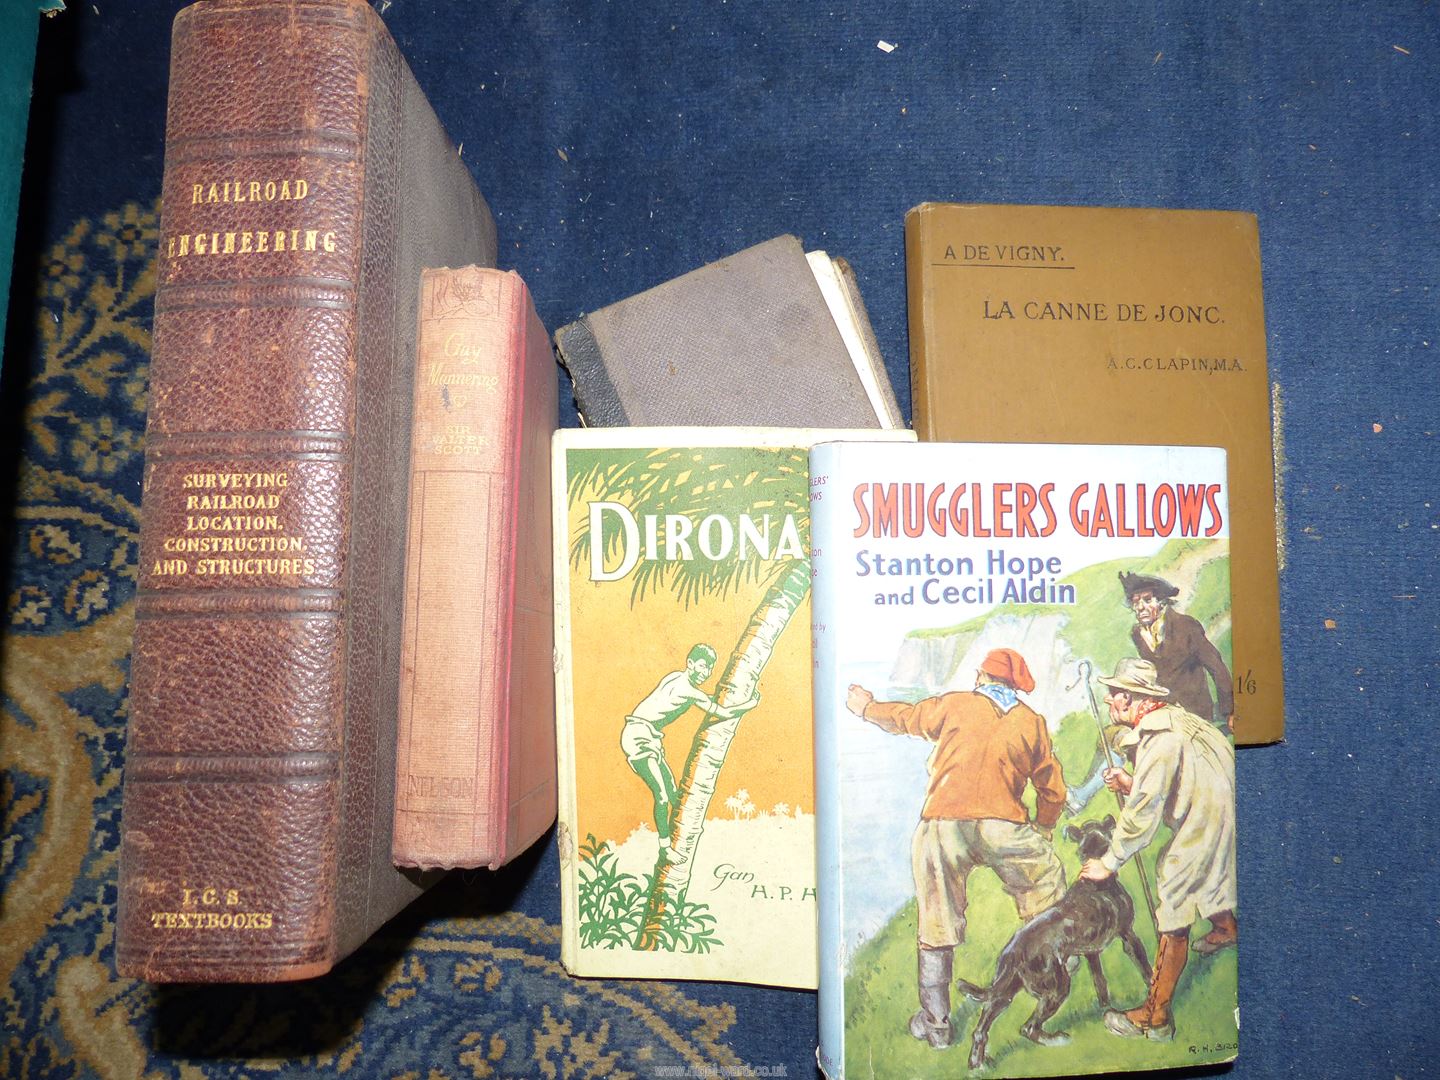 A variety of books including British History 1485-1815, Rail Road Engineering, - Image 2 of 2